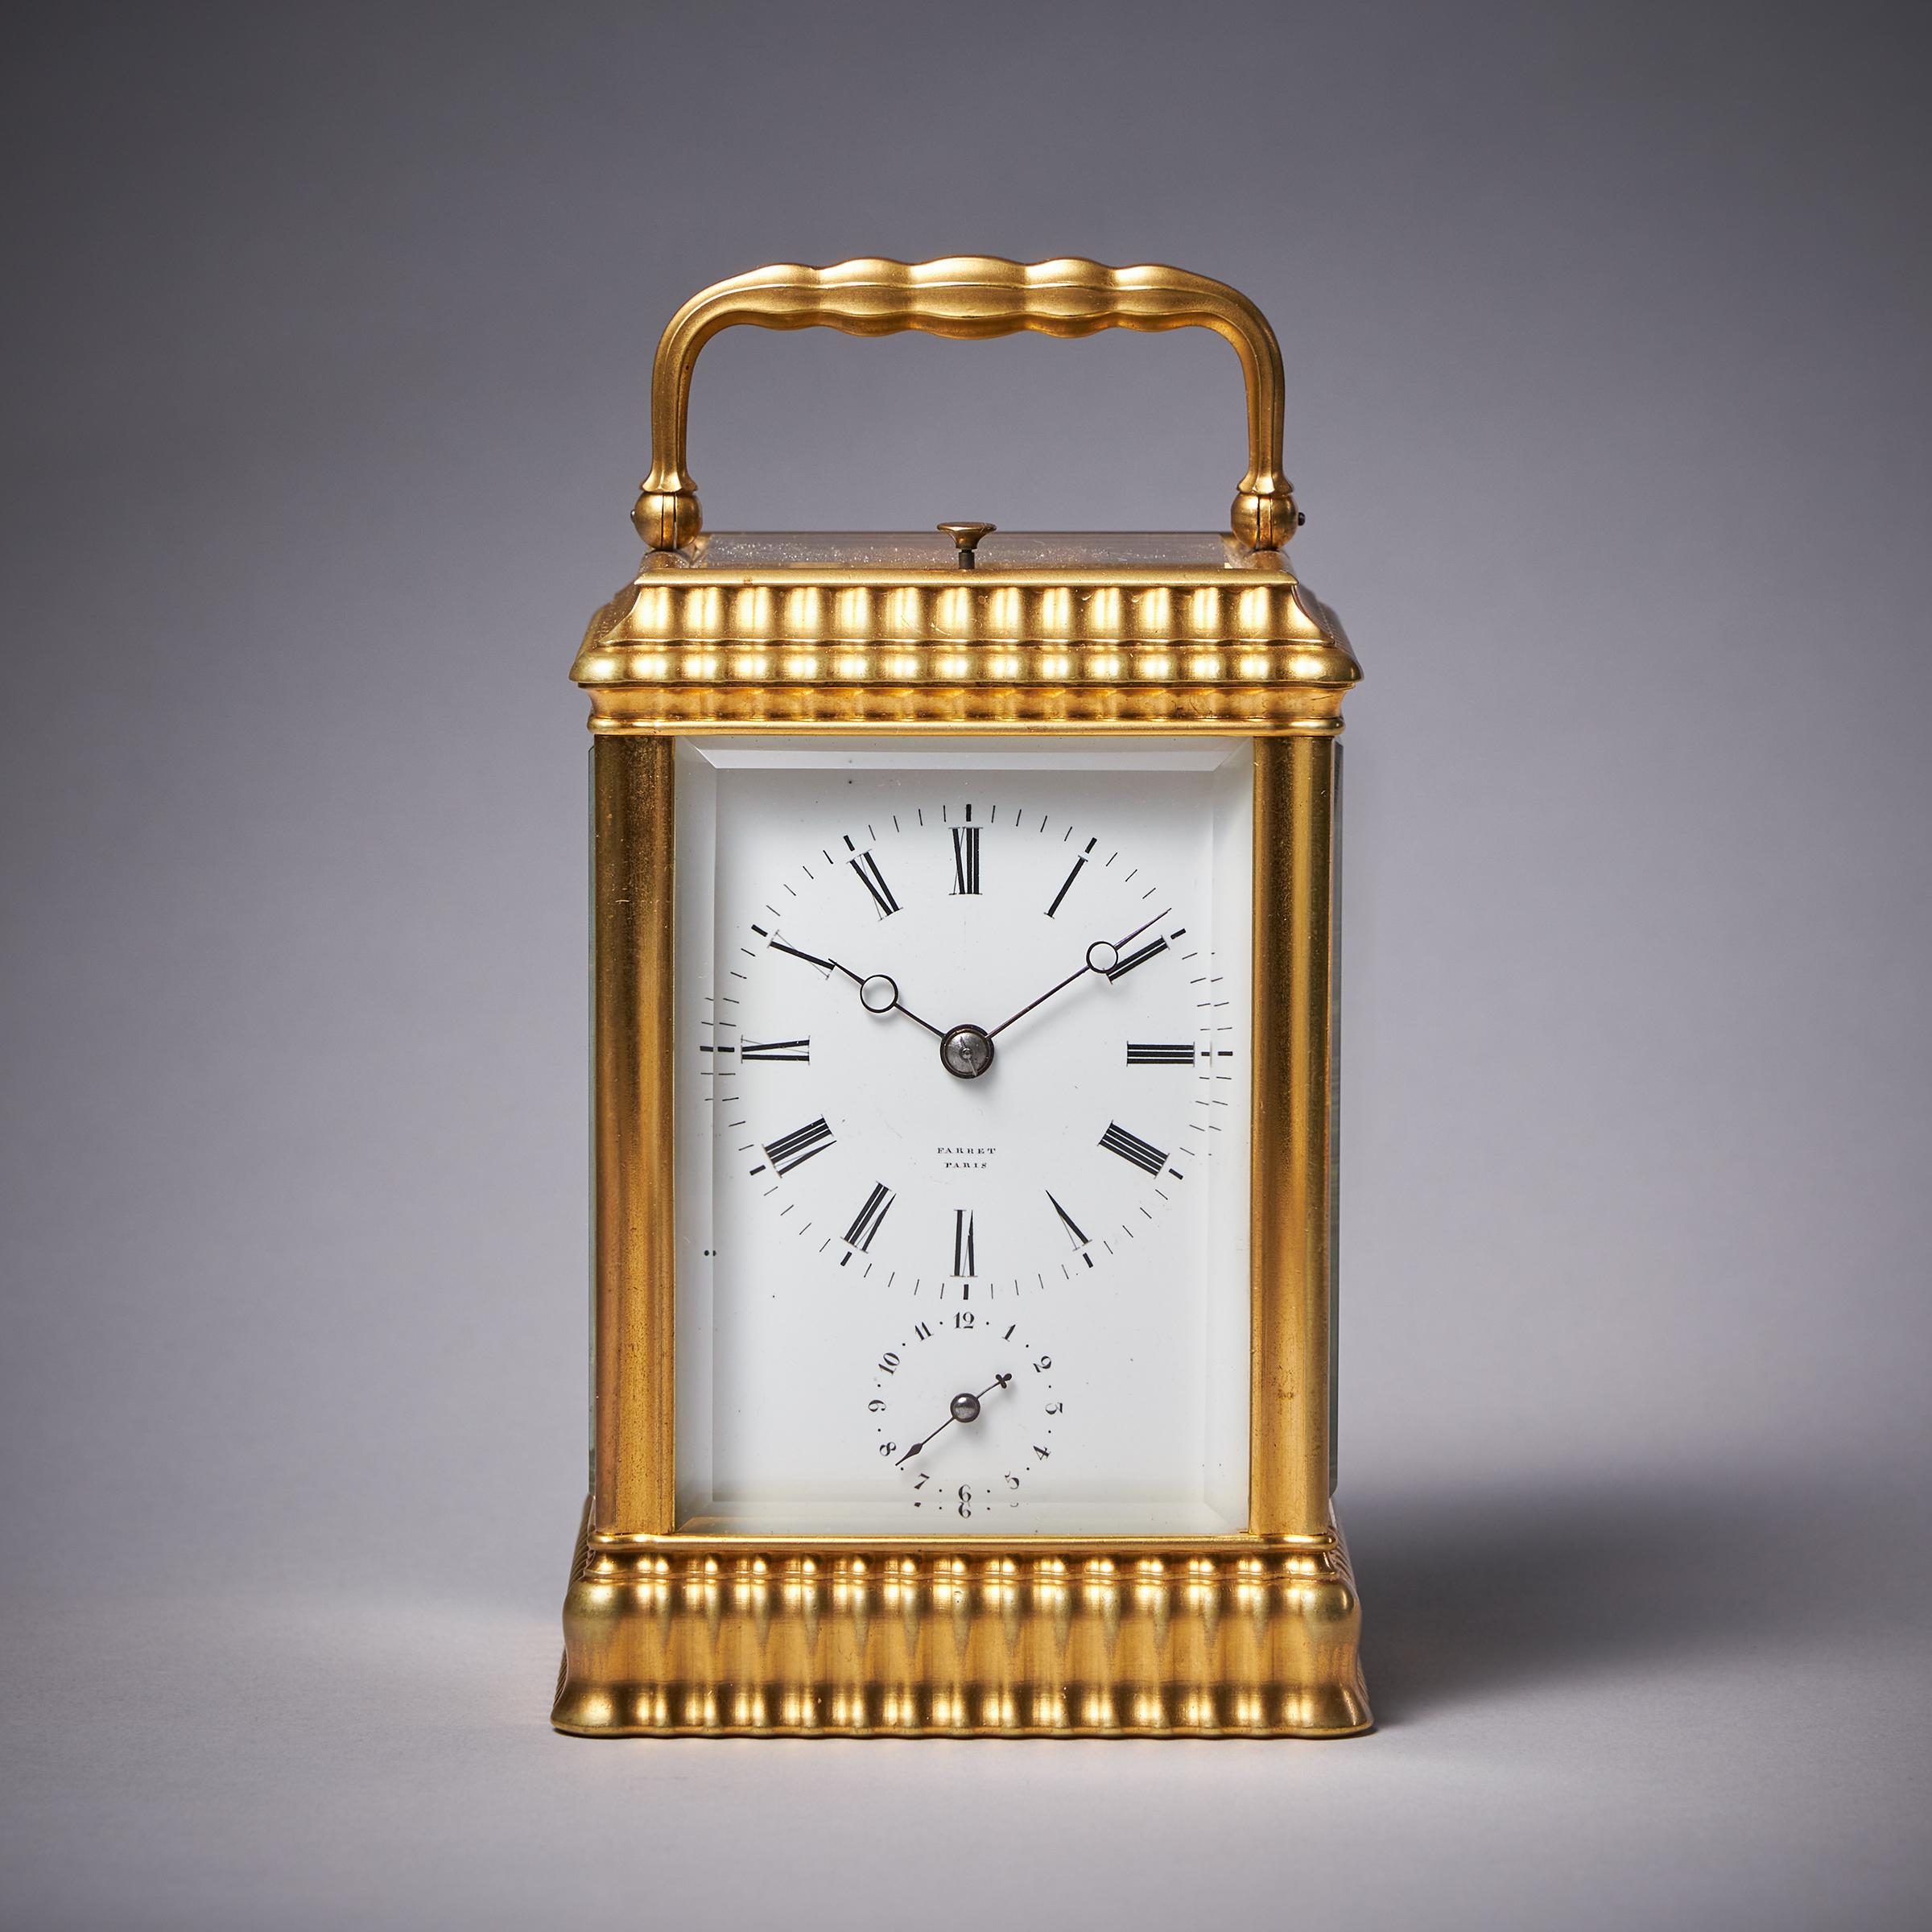 Case
The clock has a gilt-brass case which is a variation on the gorge case in that the top and bottom are ribbed, which adds to its elegance. It has bevelled glass windows on all sides so that the movement is almost entirely visible. The gilt